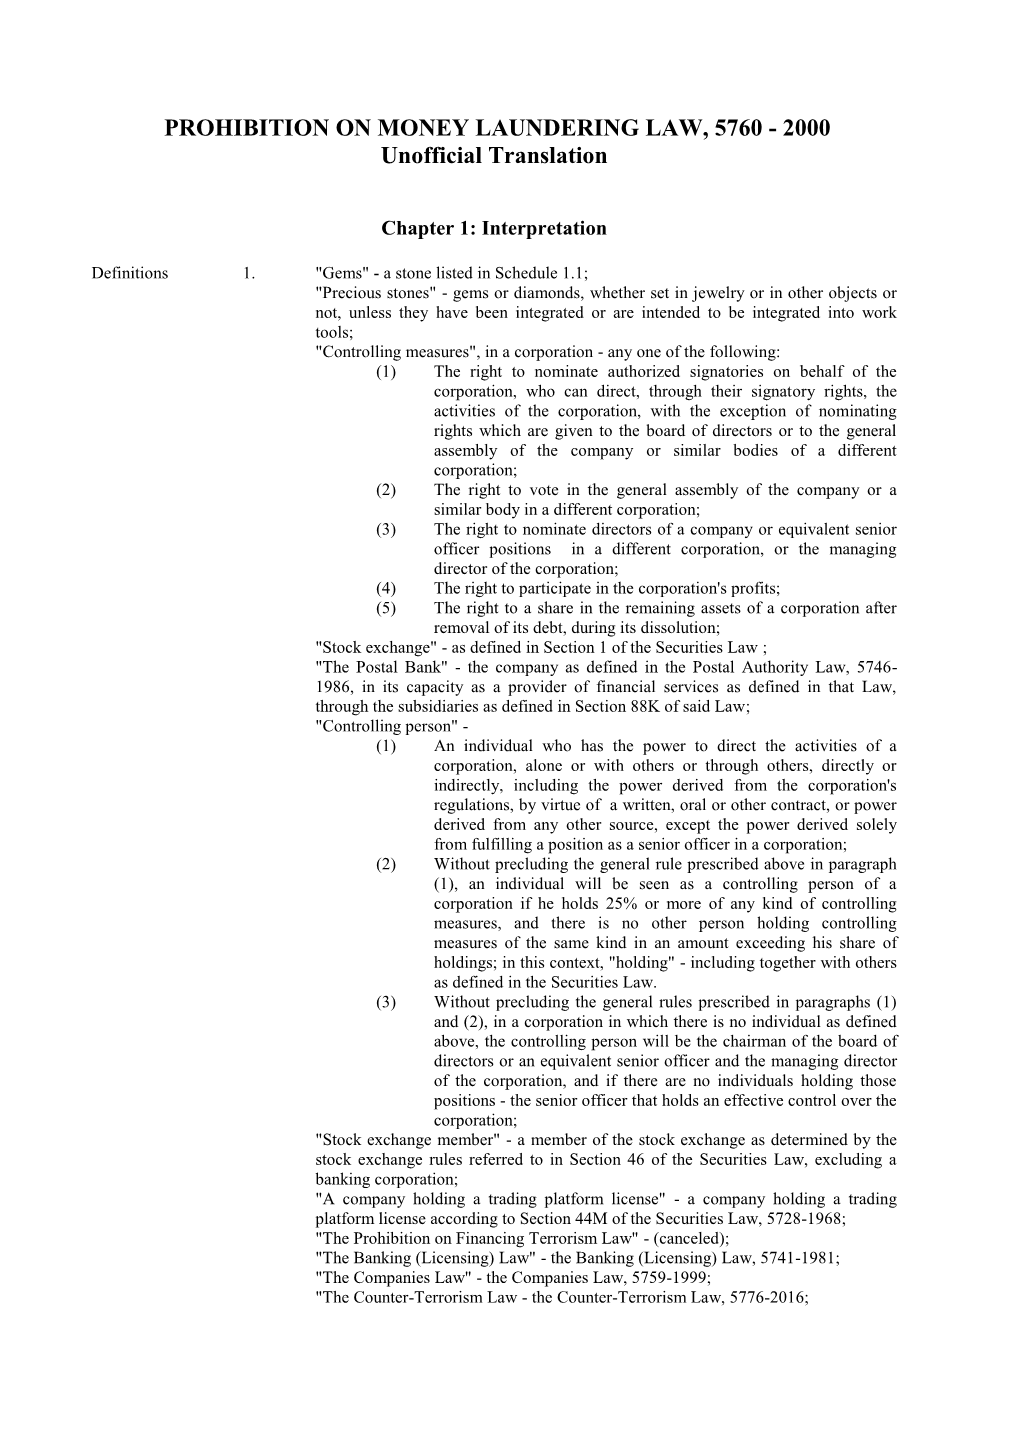 PROHIBITION on MONEY LAUNDERING LAW, 5760 - 2000 Unofficial Translation